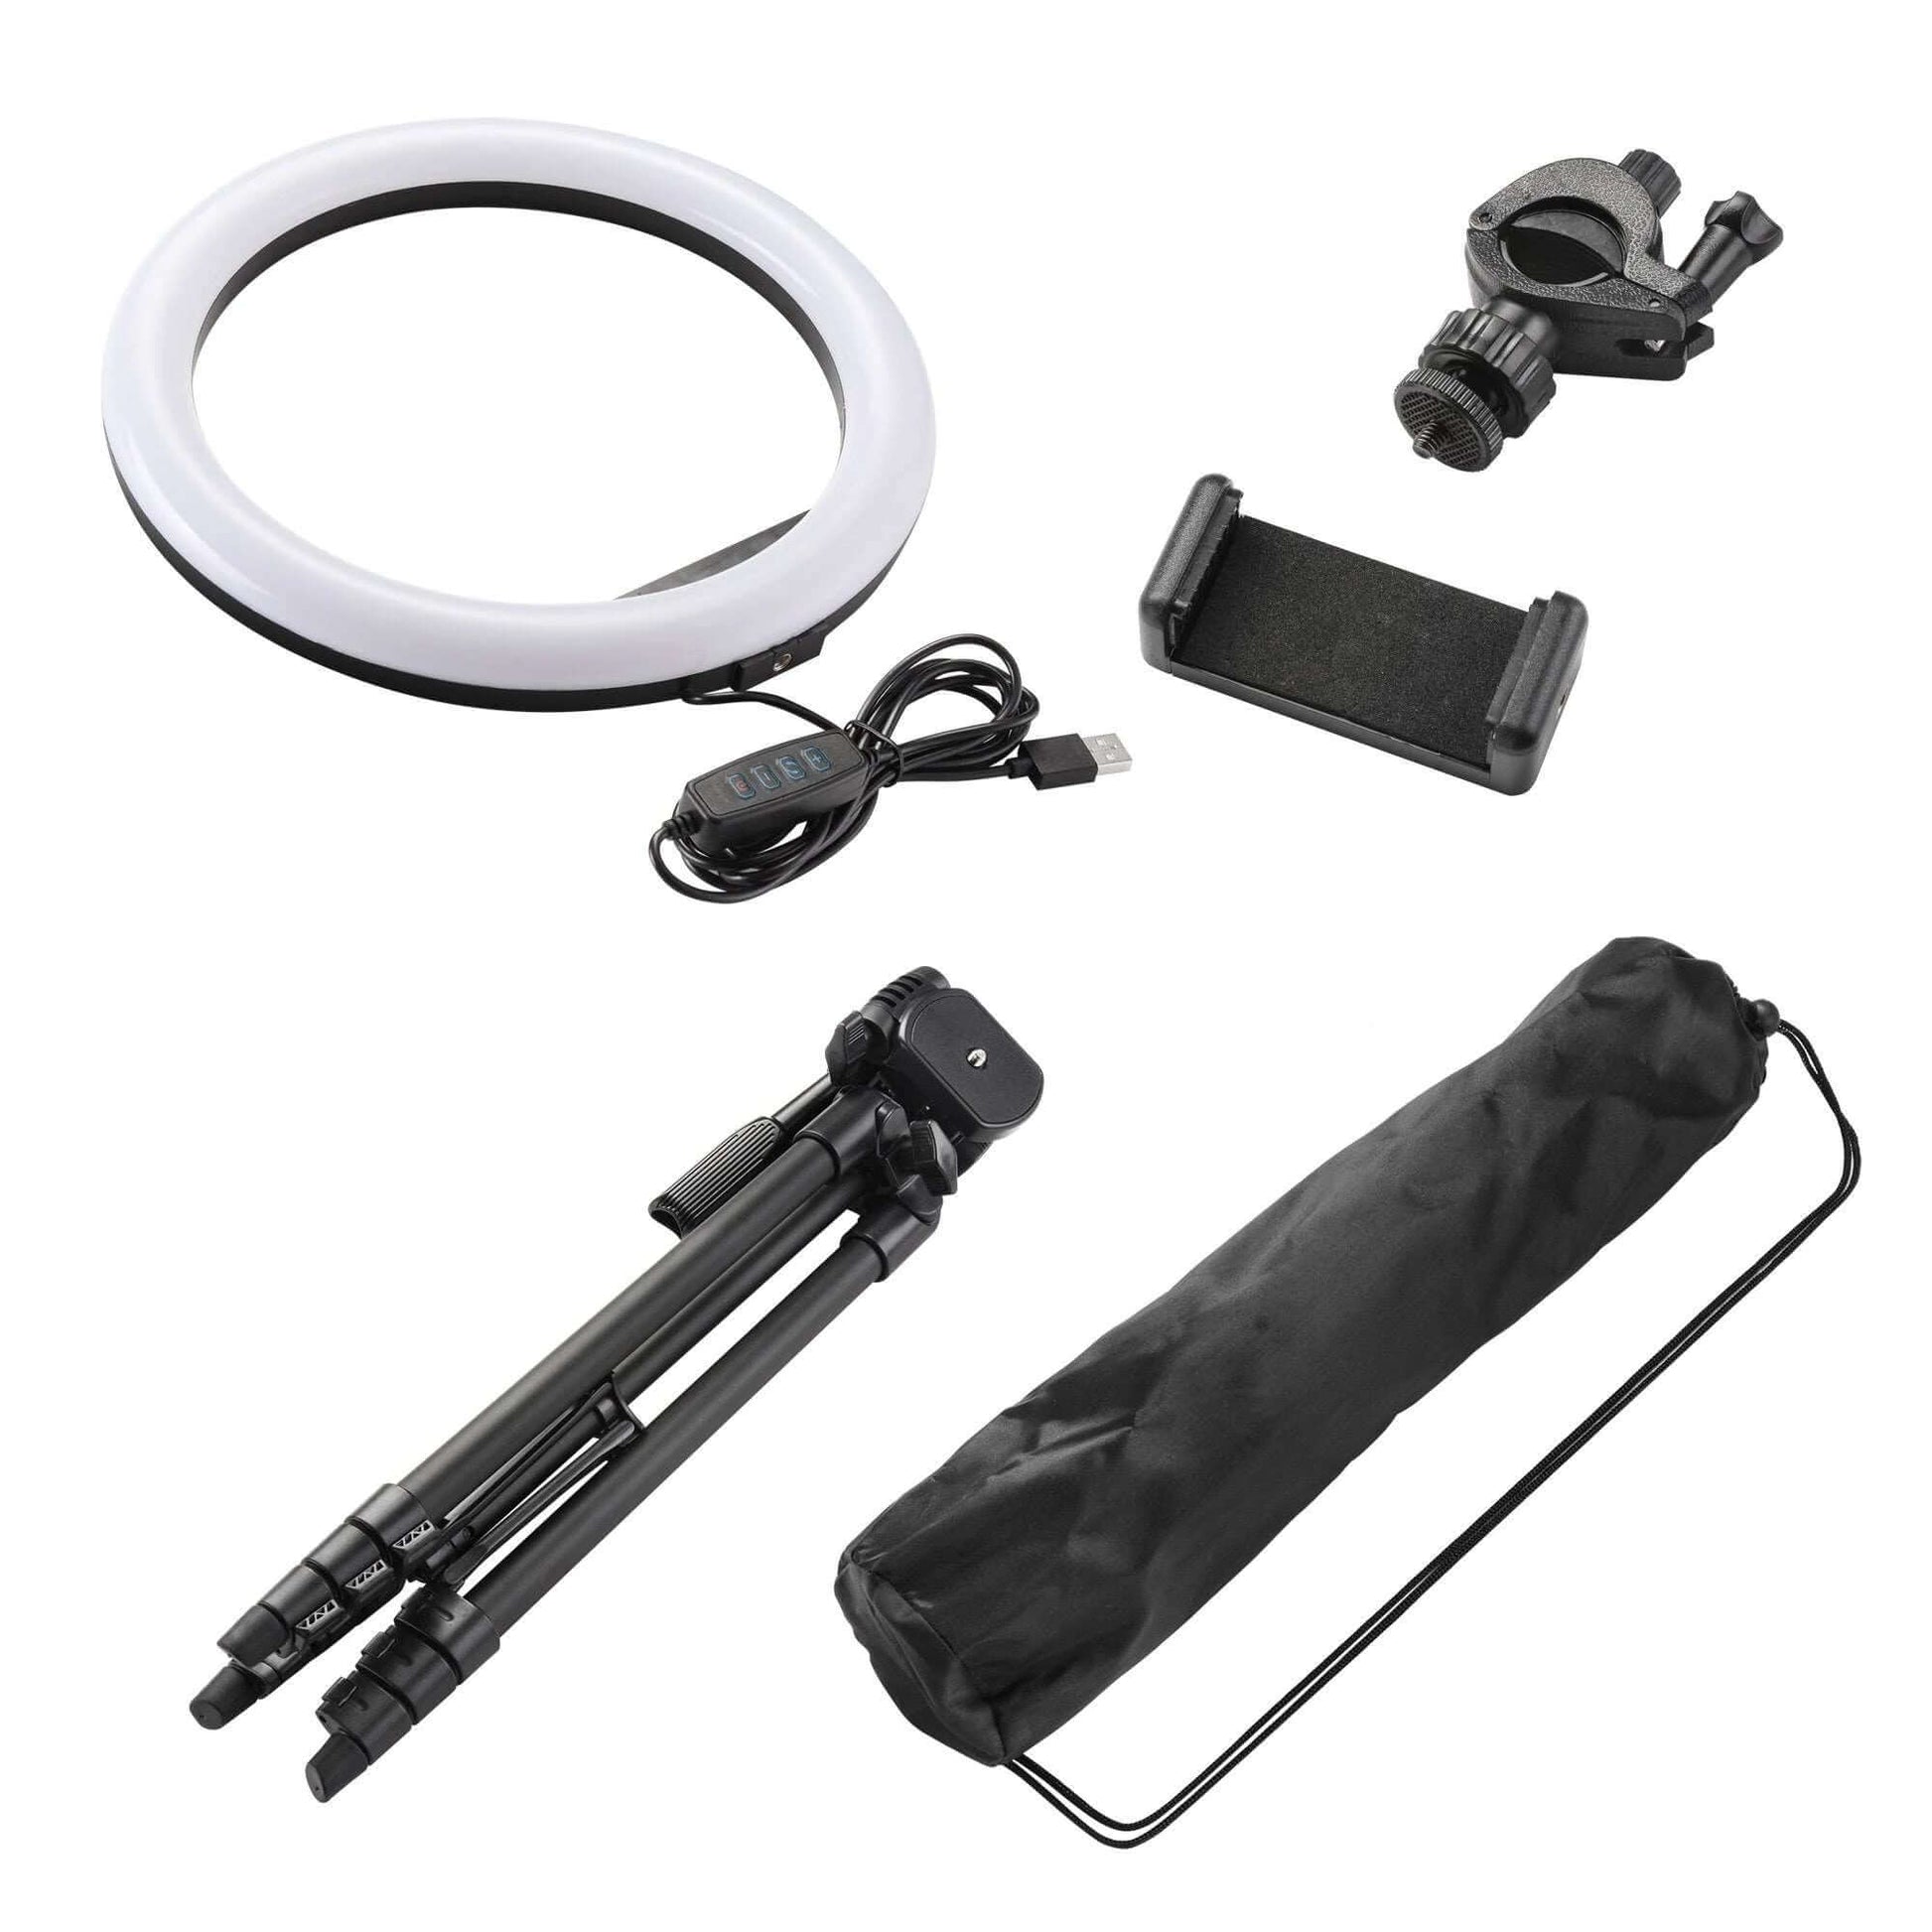 10'' Ring Light Designed for Content Creators - W/Phone Mount, LED Dimmable, 360° Adjustable Lighting 